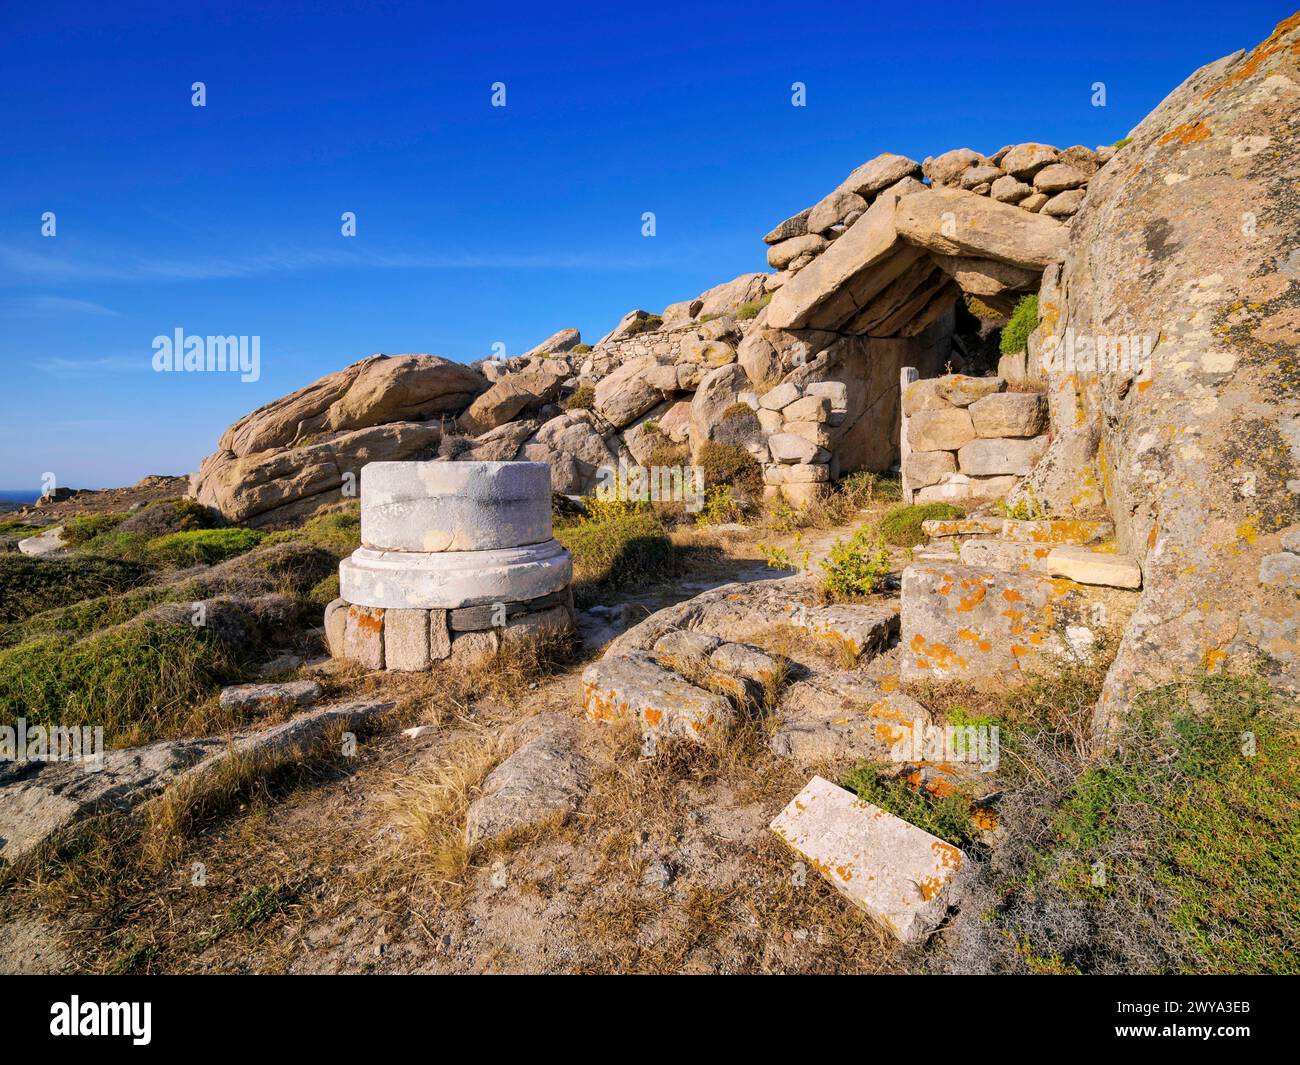 Grotto of Heracles, Mount Kynthos, Delos Archaeological Site, UNESCO World Heritage Site, Delos Island, Cyclades, Greek Islands, Greece, Europe Copyri Stock Photo